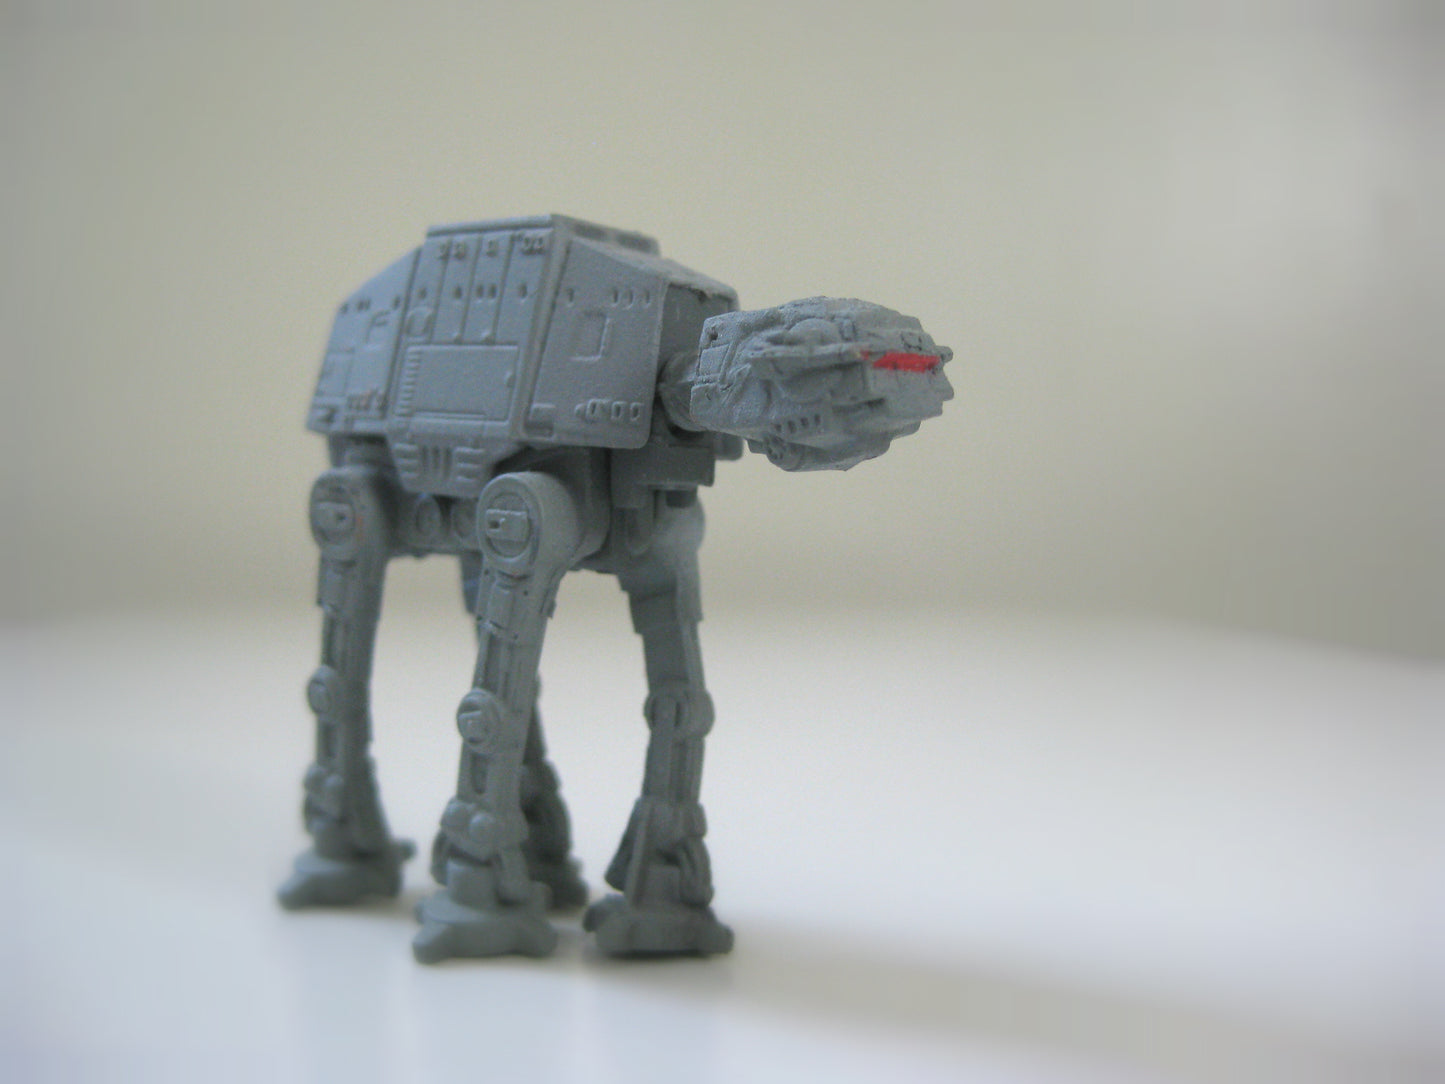 Miniature 2" Star Wars Imperial AT-AT Walker Plastic Toy Scale Model